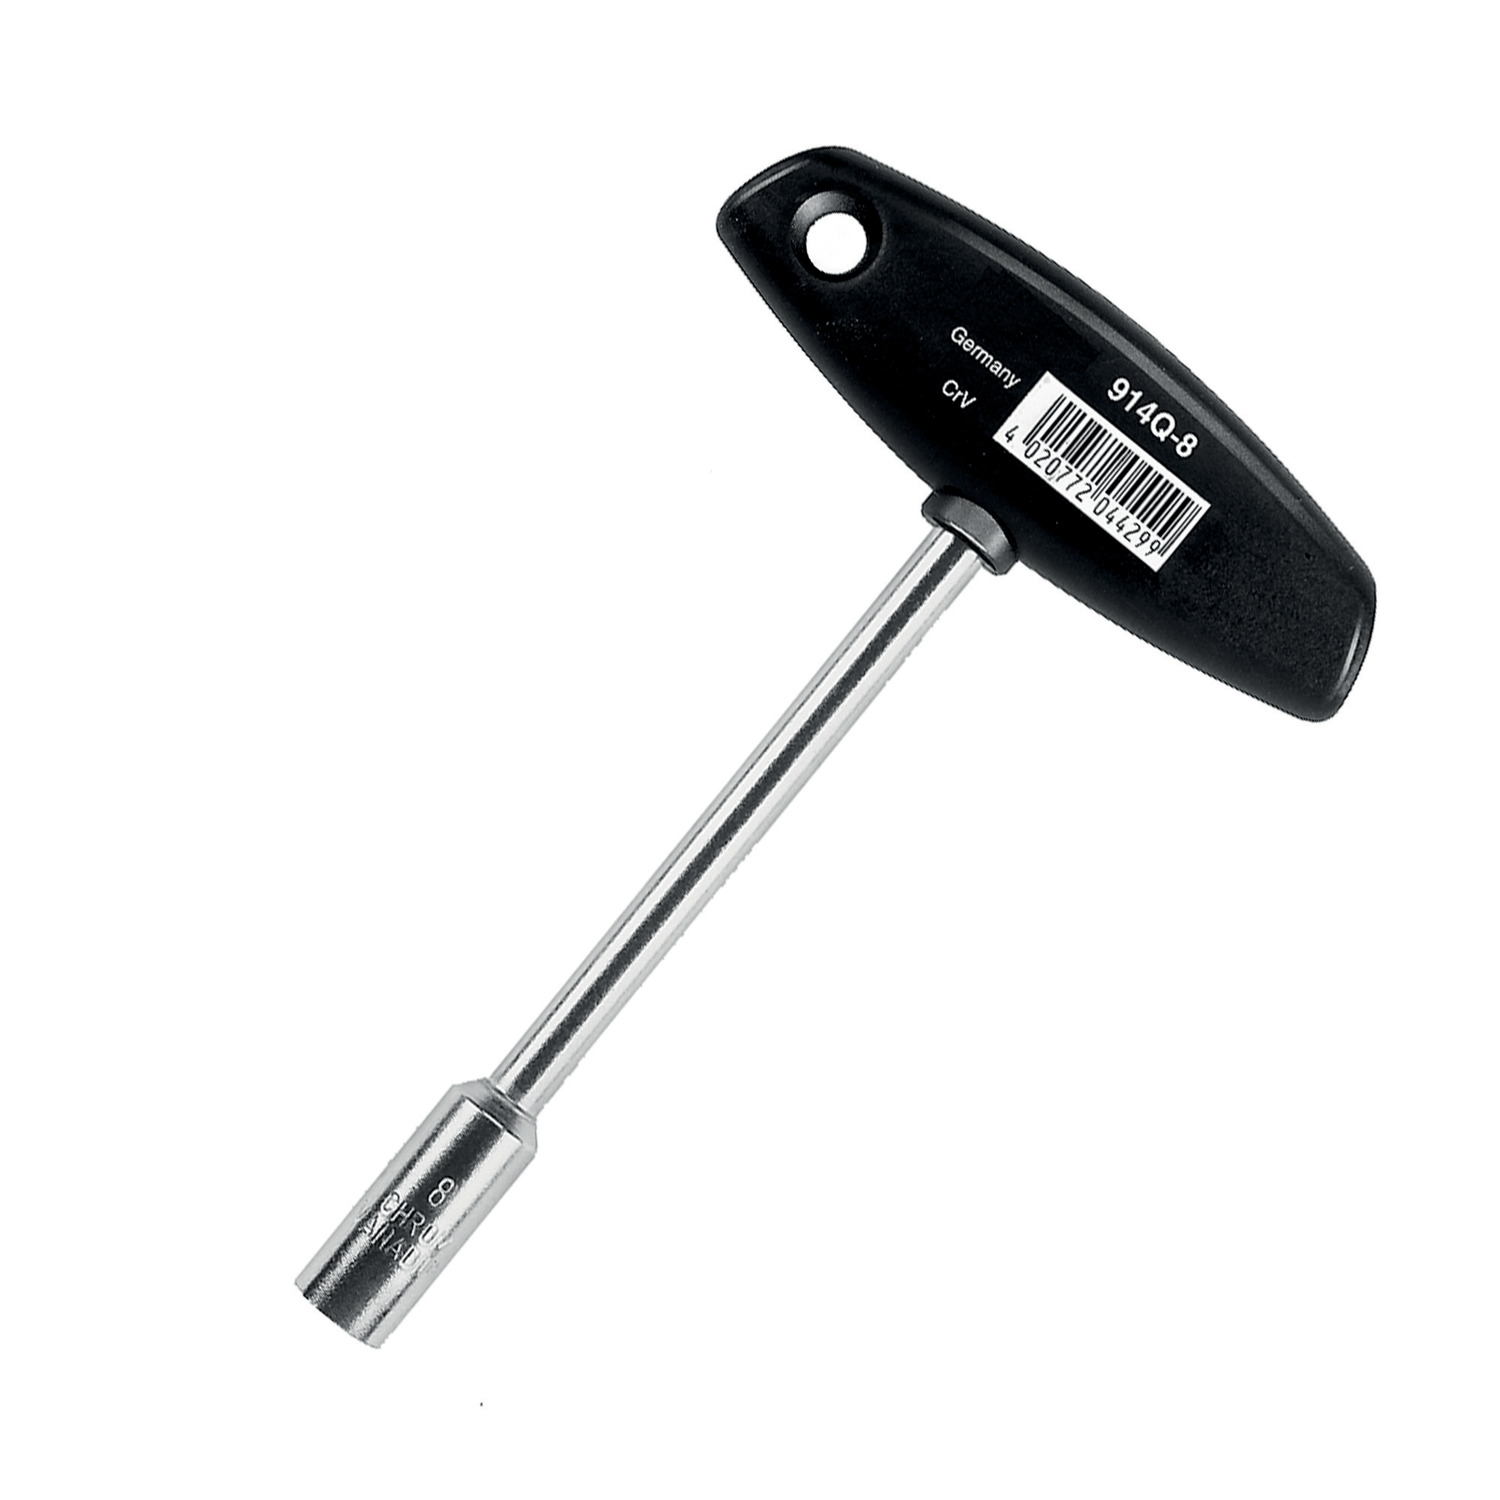 Product 92070, Square Socket Wrench T-handled / 